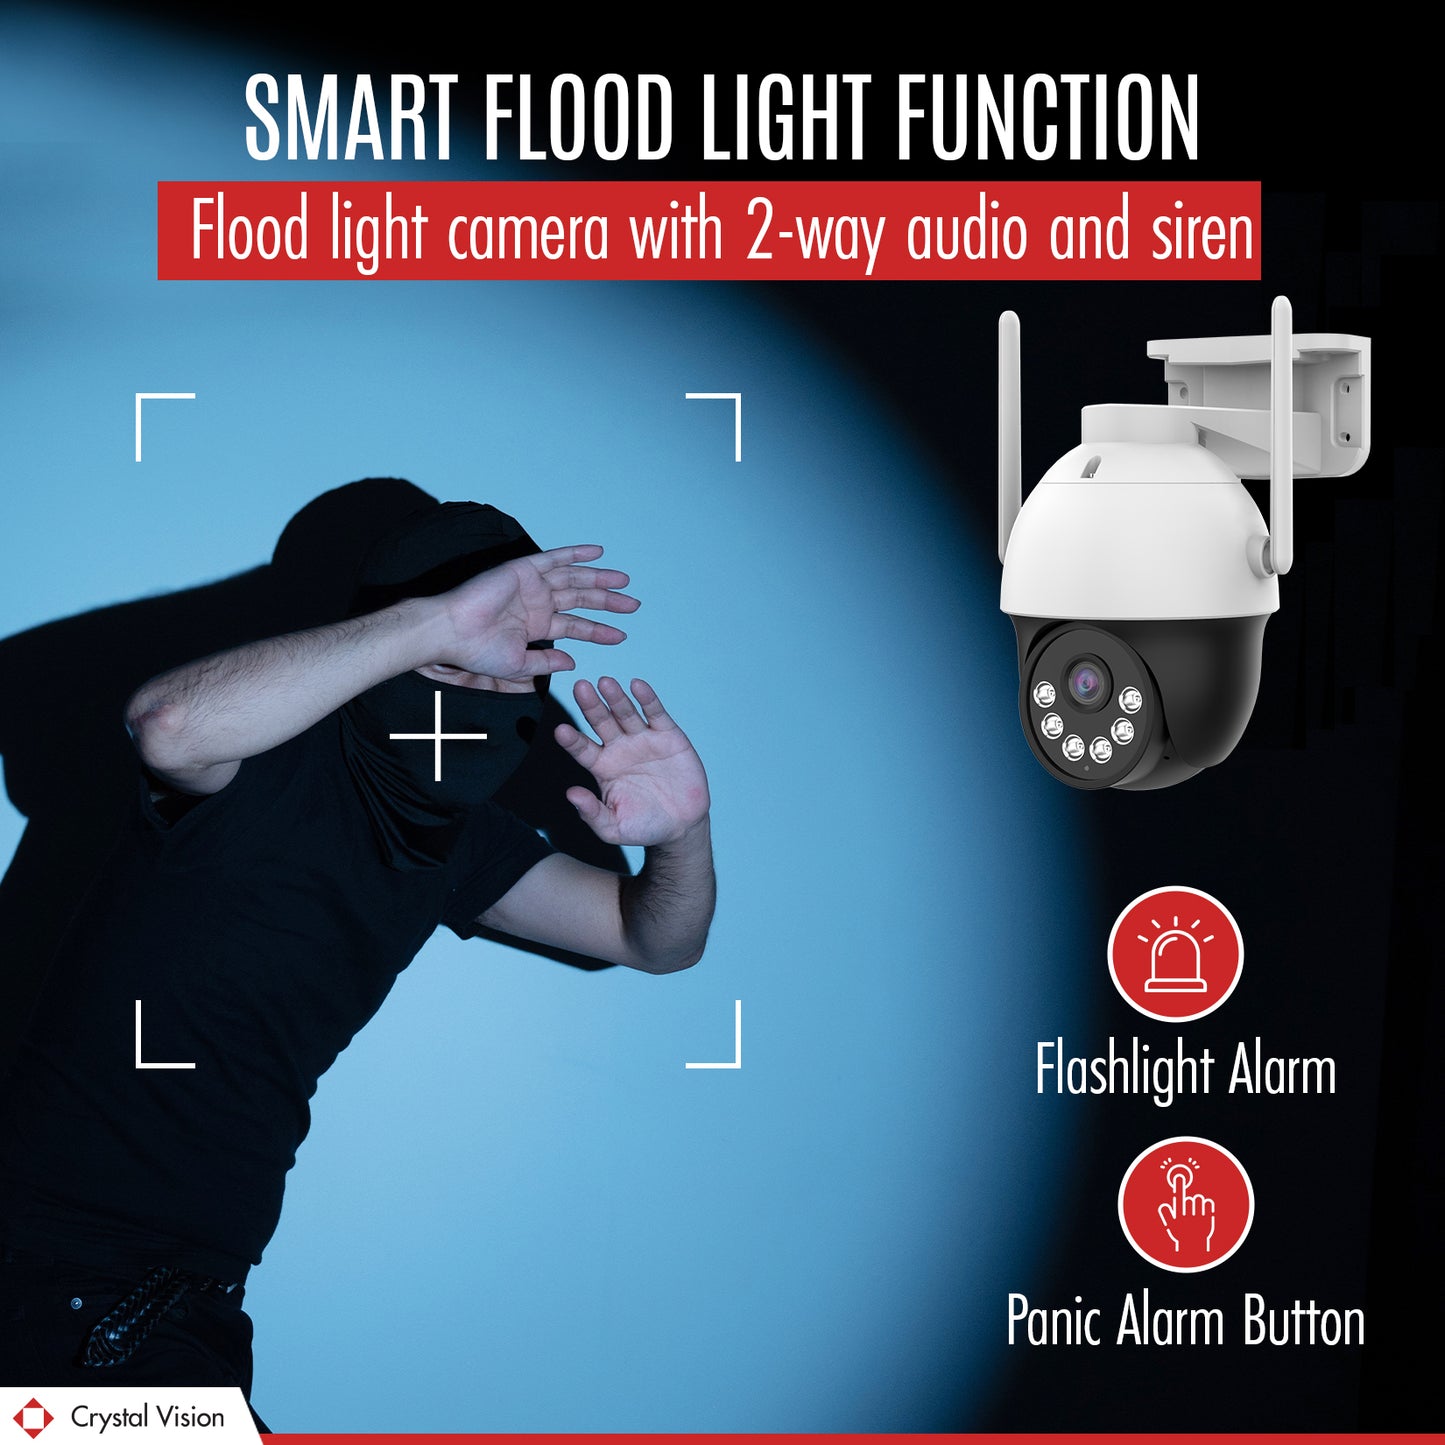 Advertisement for Crystal Vision's 'SMART FLOOD LIGHT FUNCTION' showcasing a flood light Pantilt camera with 2-way audio and siren, a burglar recoiling in the light, accompanied by icons for 'Flashlight Alarm' and 'Panic Alarm Button